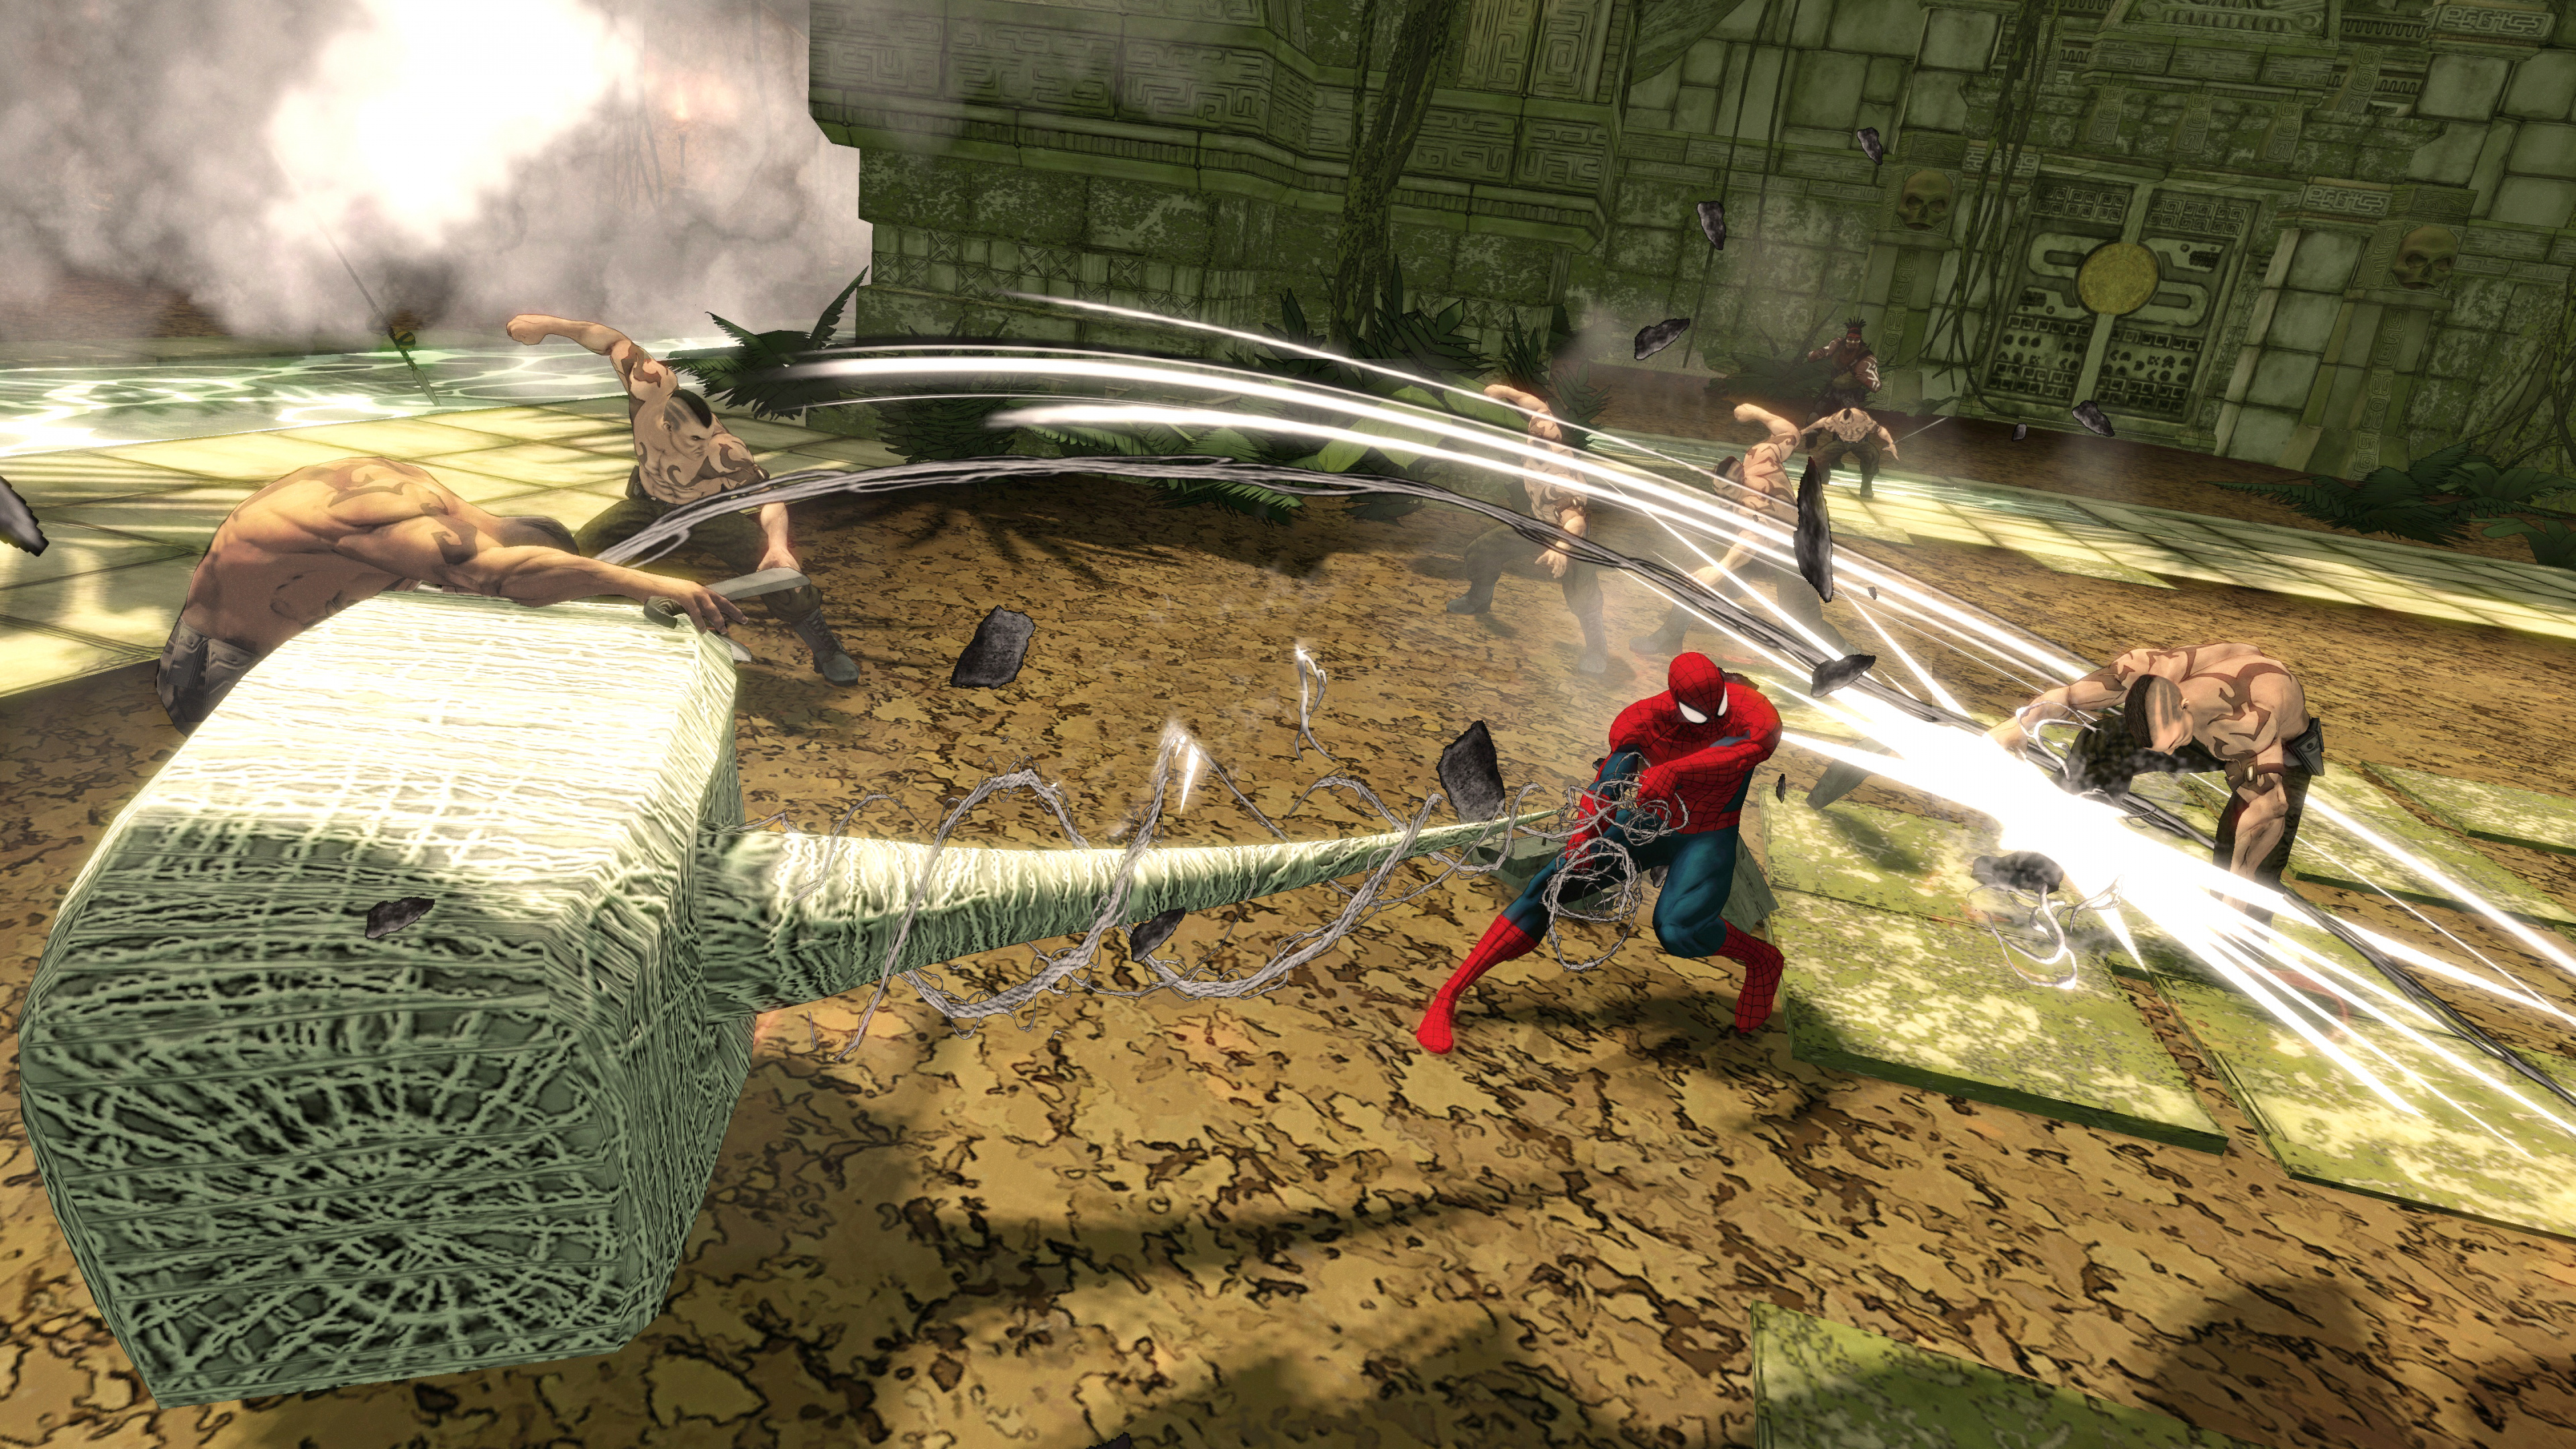 Spider-Man Shattered Dimensions, Spider-man, Xbox 360, Wii, Juego de Pc. Wallpaper in 3840x2160 Resolution